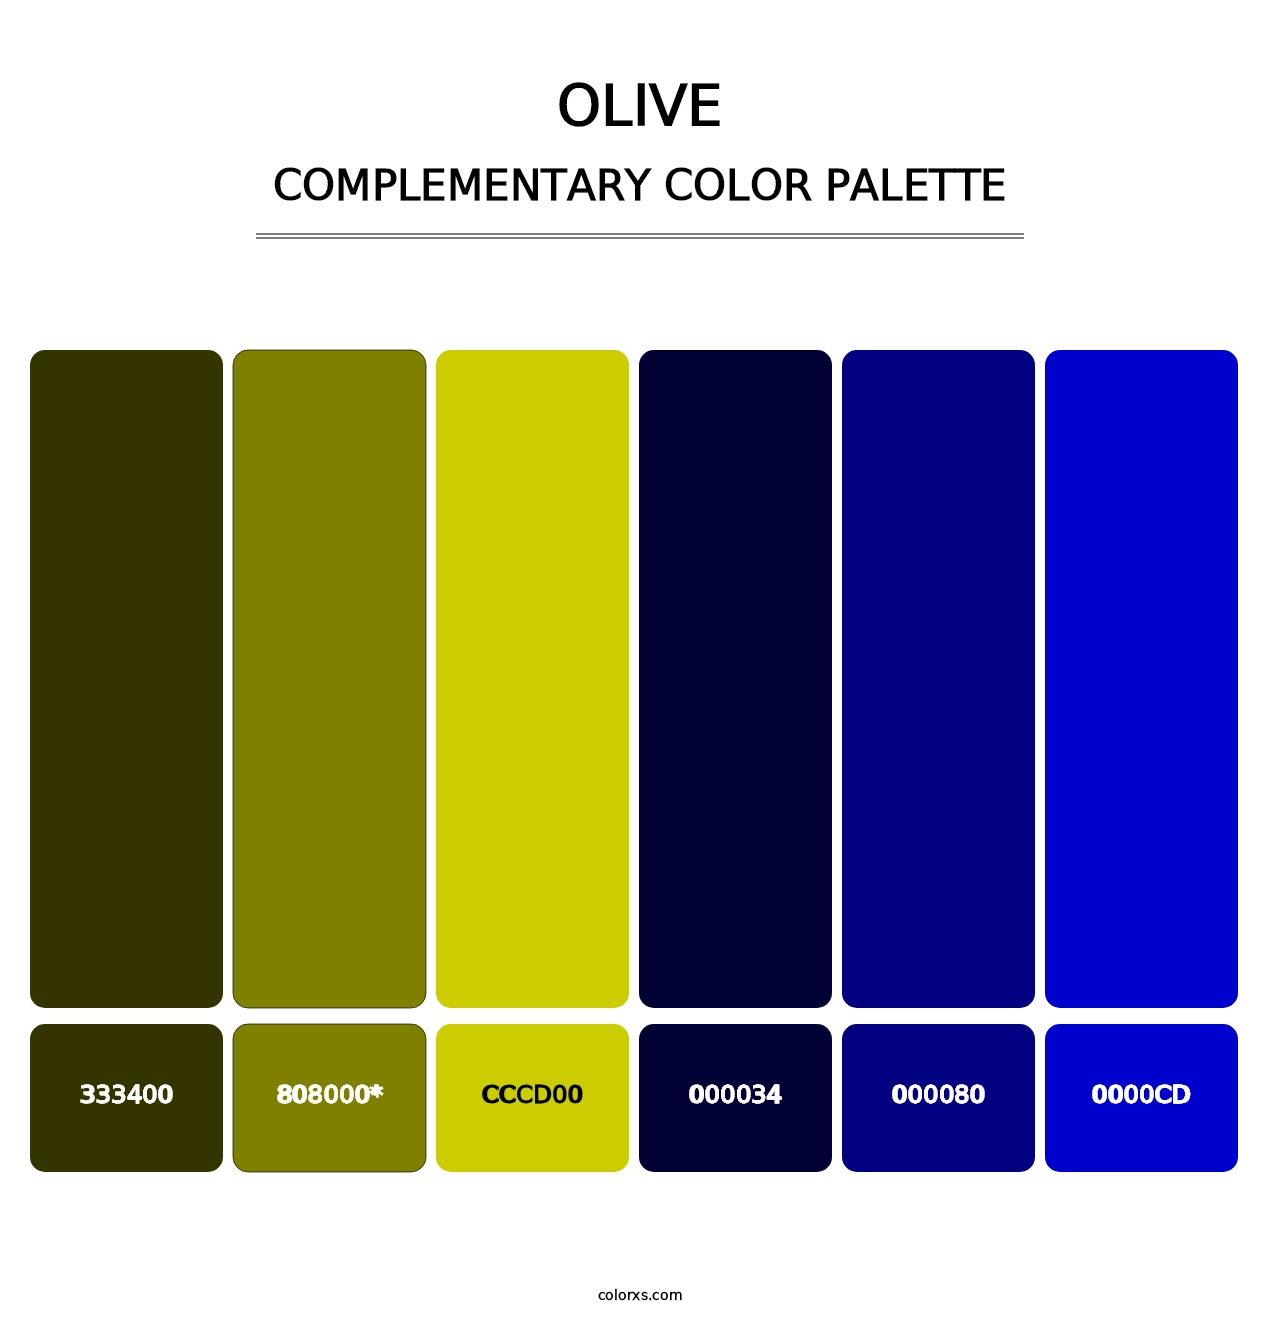 Olive - Complementary Color Palette